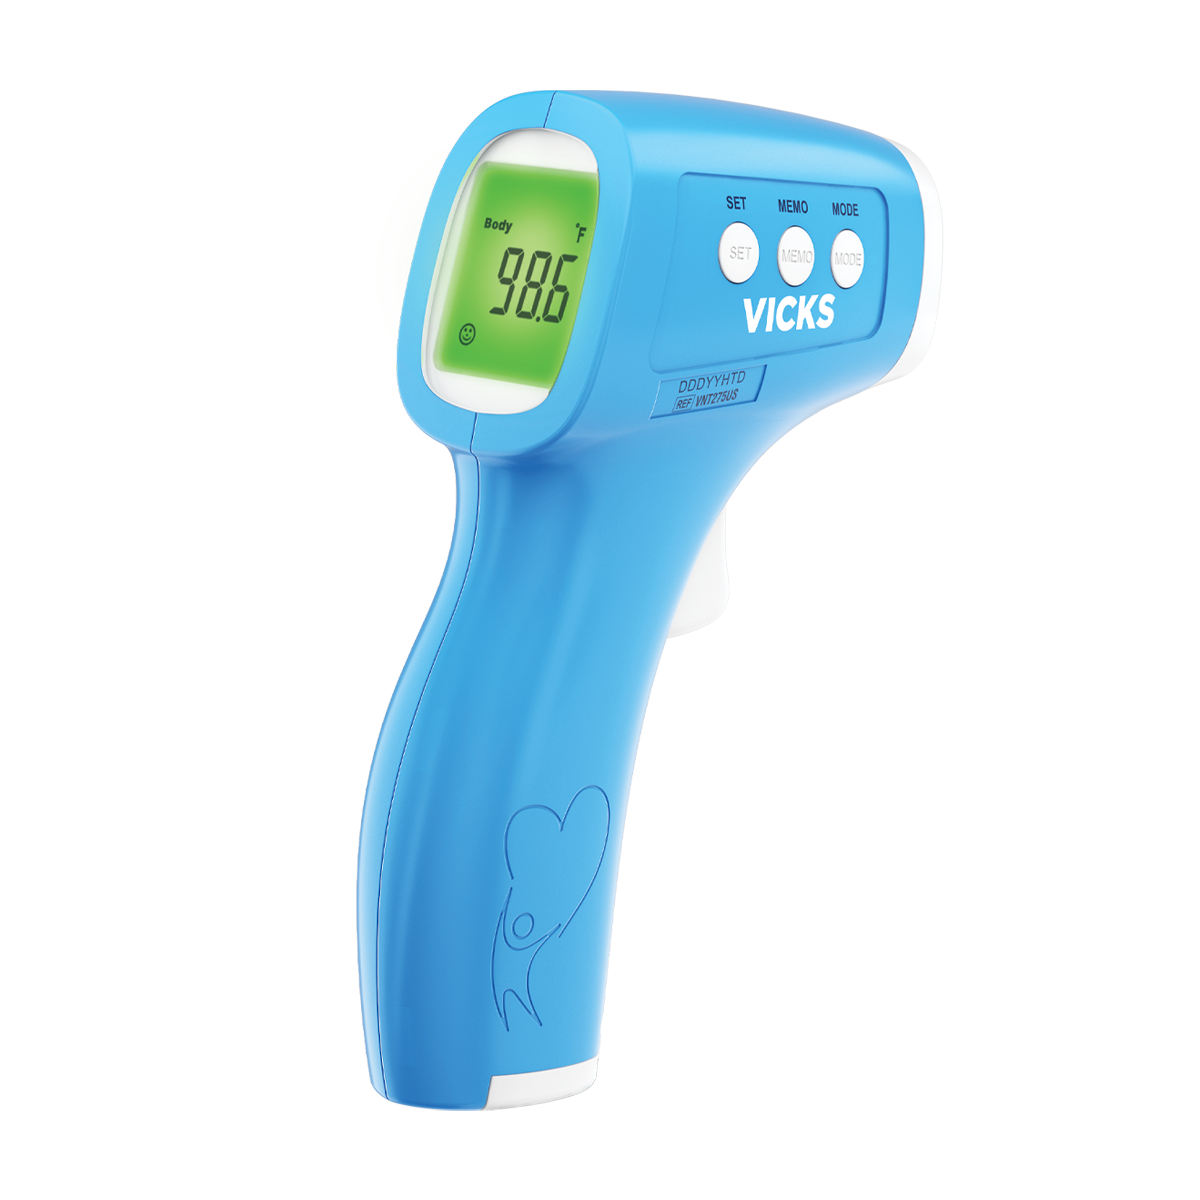 Touchless Forehead Thermometer for Fever, No Contact Infrared